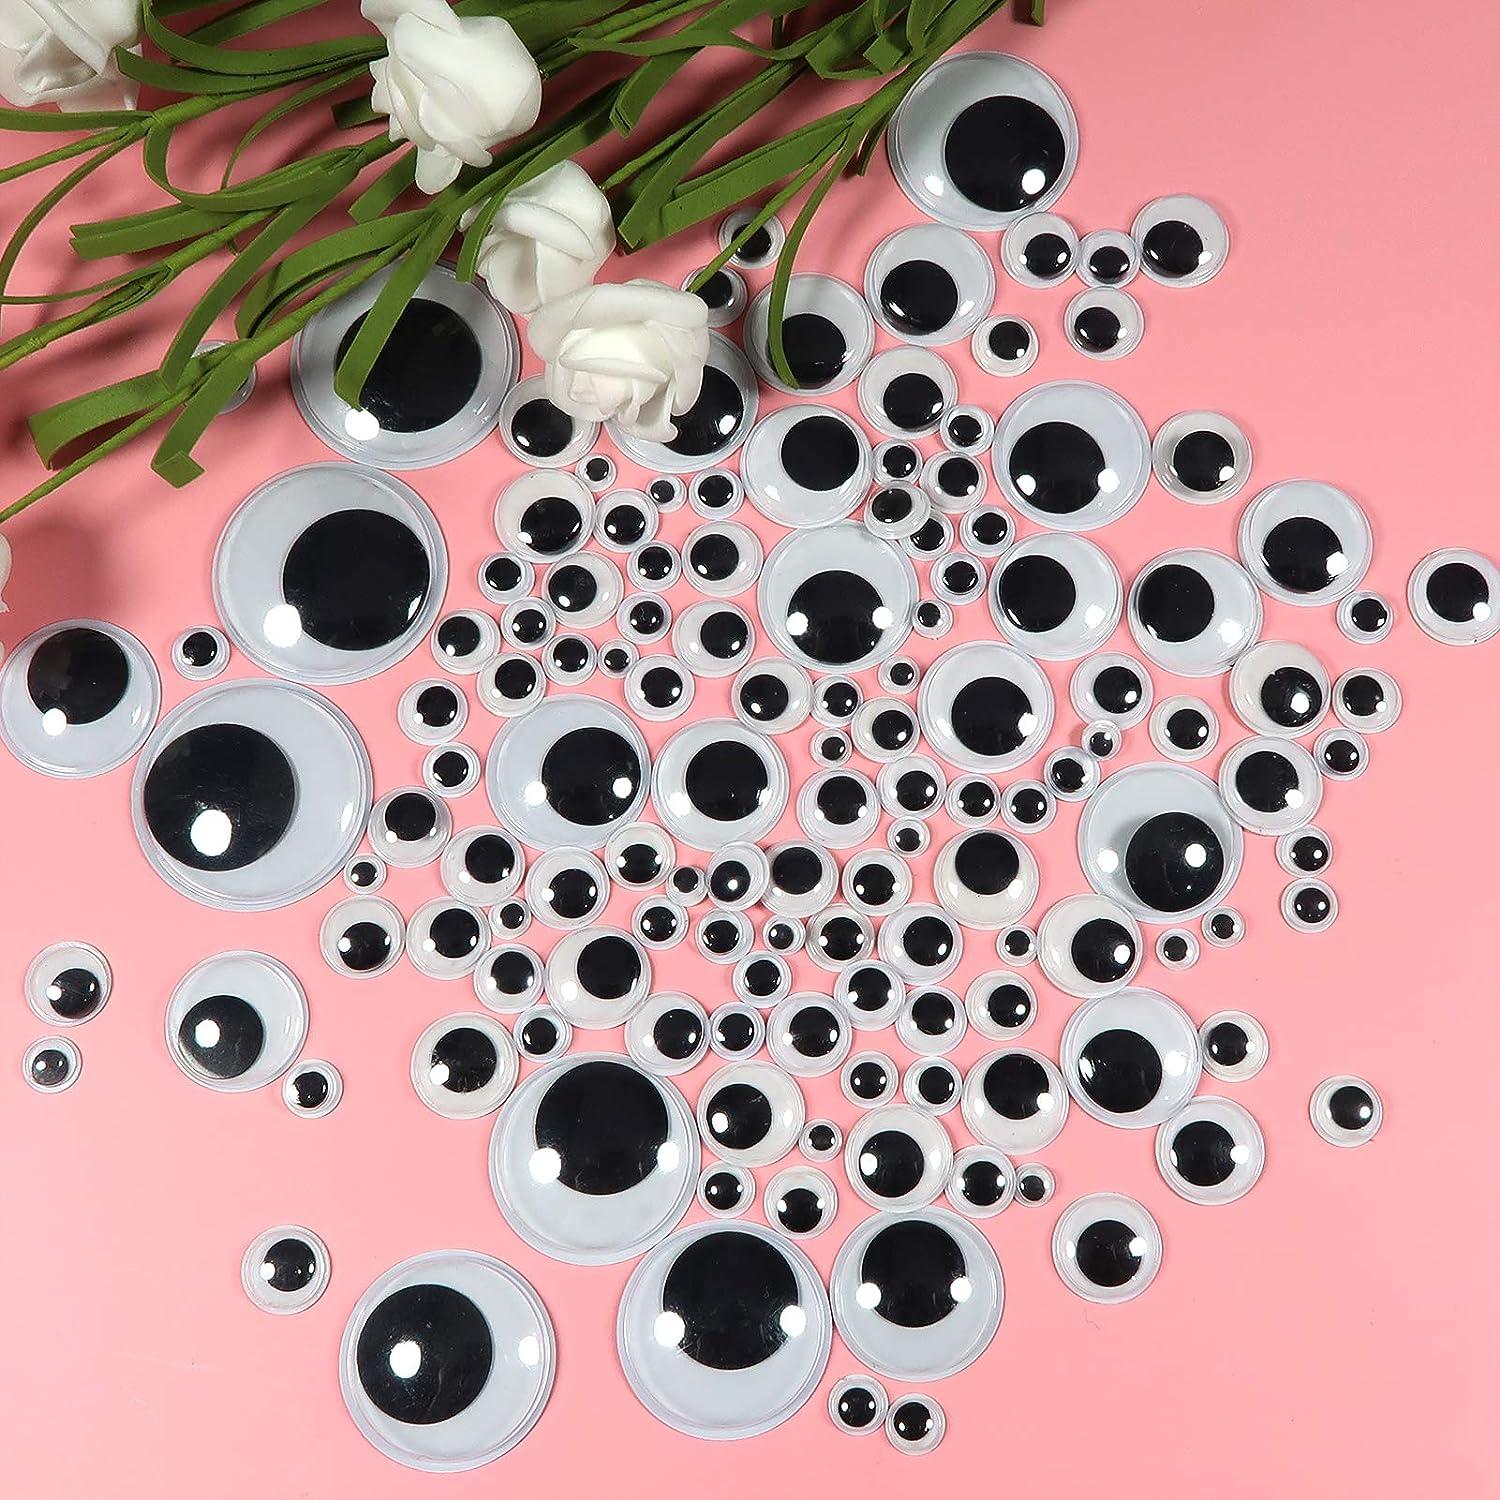 TOAOB 8pcs Giant Googly Eyes 4 Inch Plastic Wiggle Eyes with Self Adhesive  Black White Googly Eyes for DIY Crafts Christmas Halloween Decoration